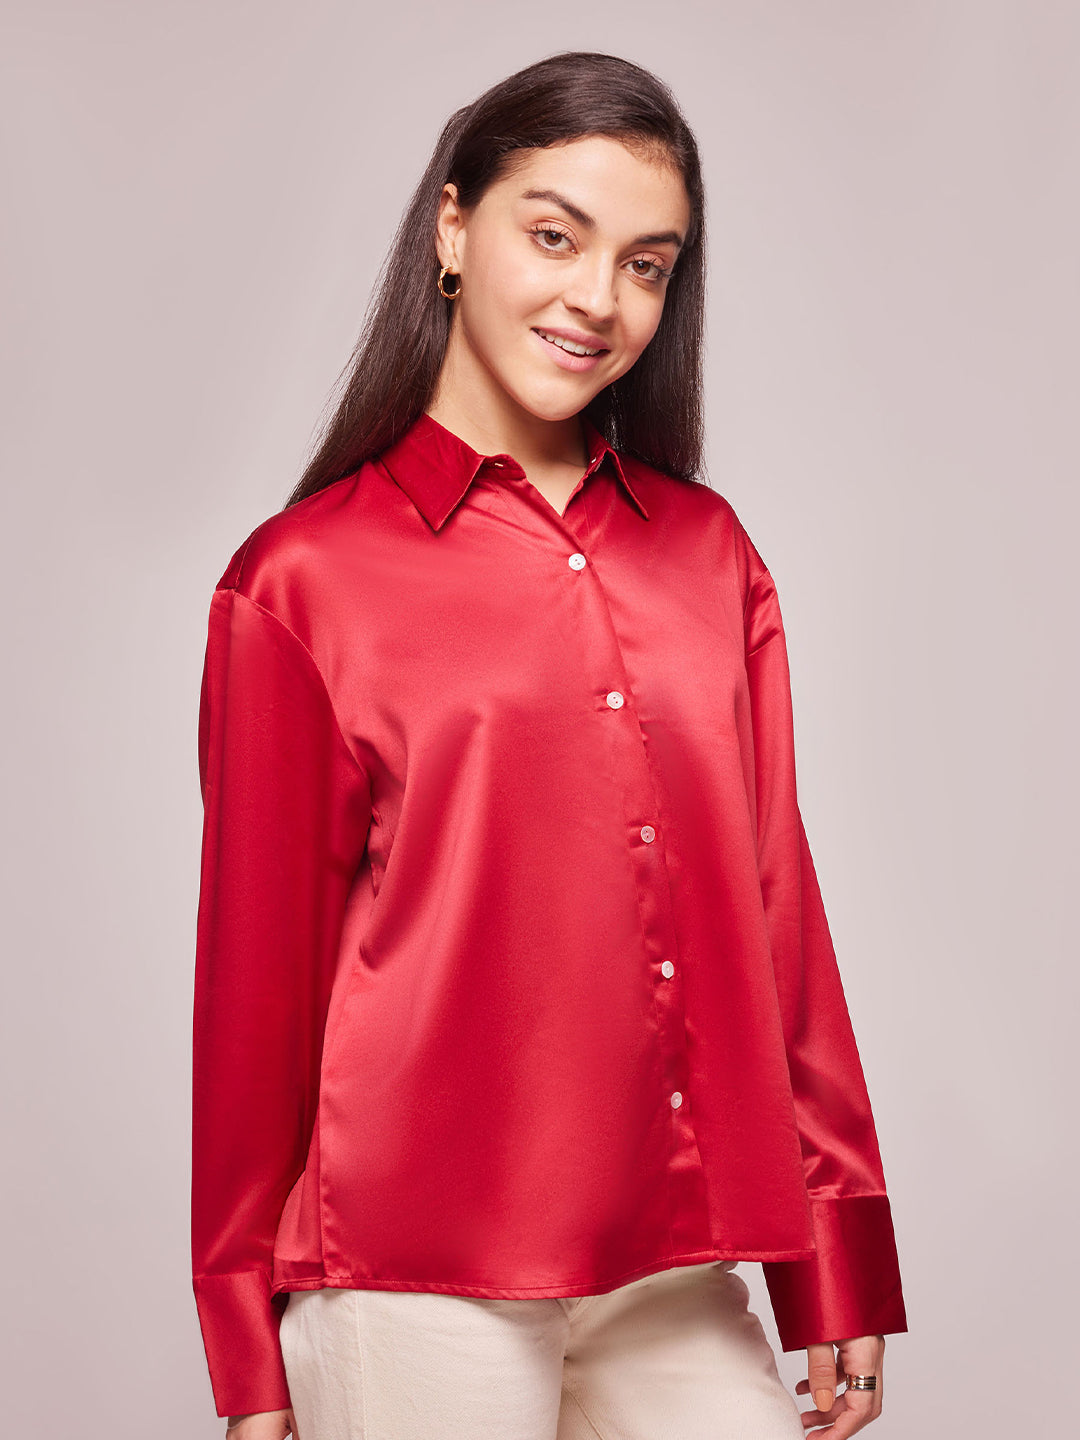 Bombay High Women's Ruby Red Solid Satin Shirt